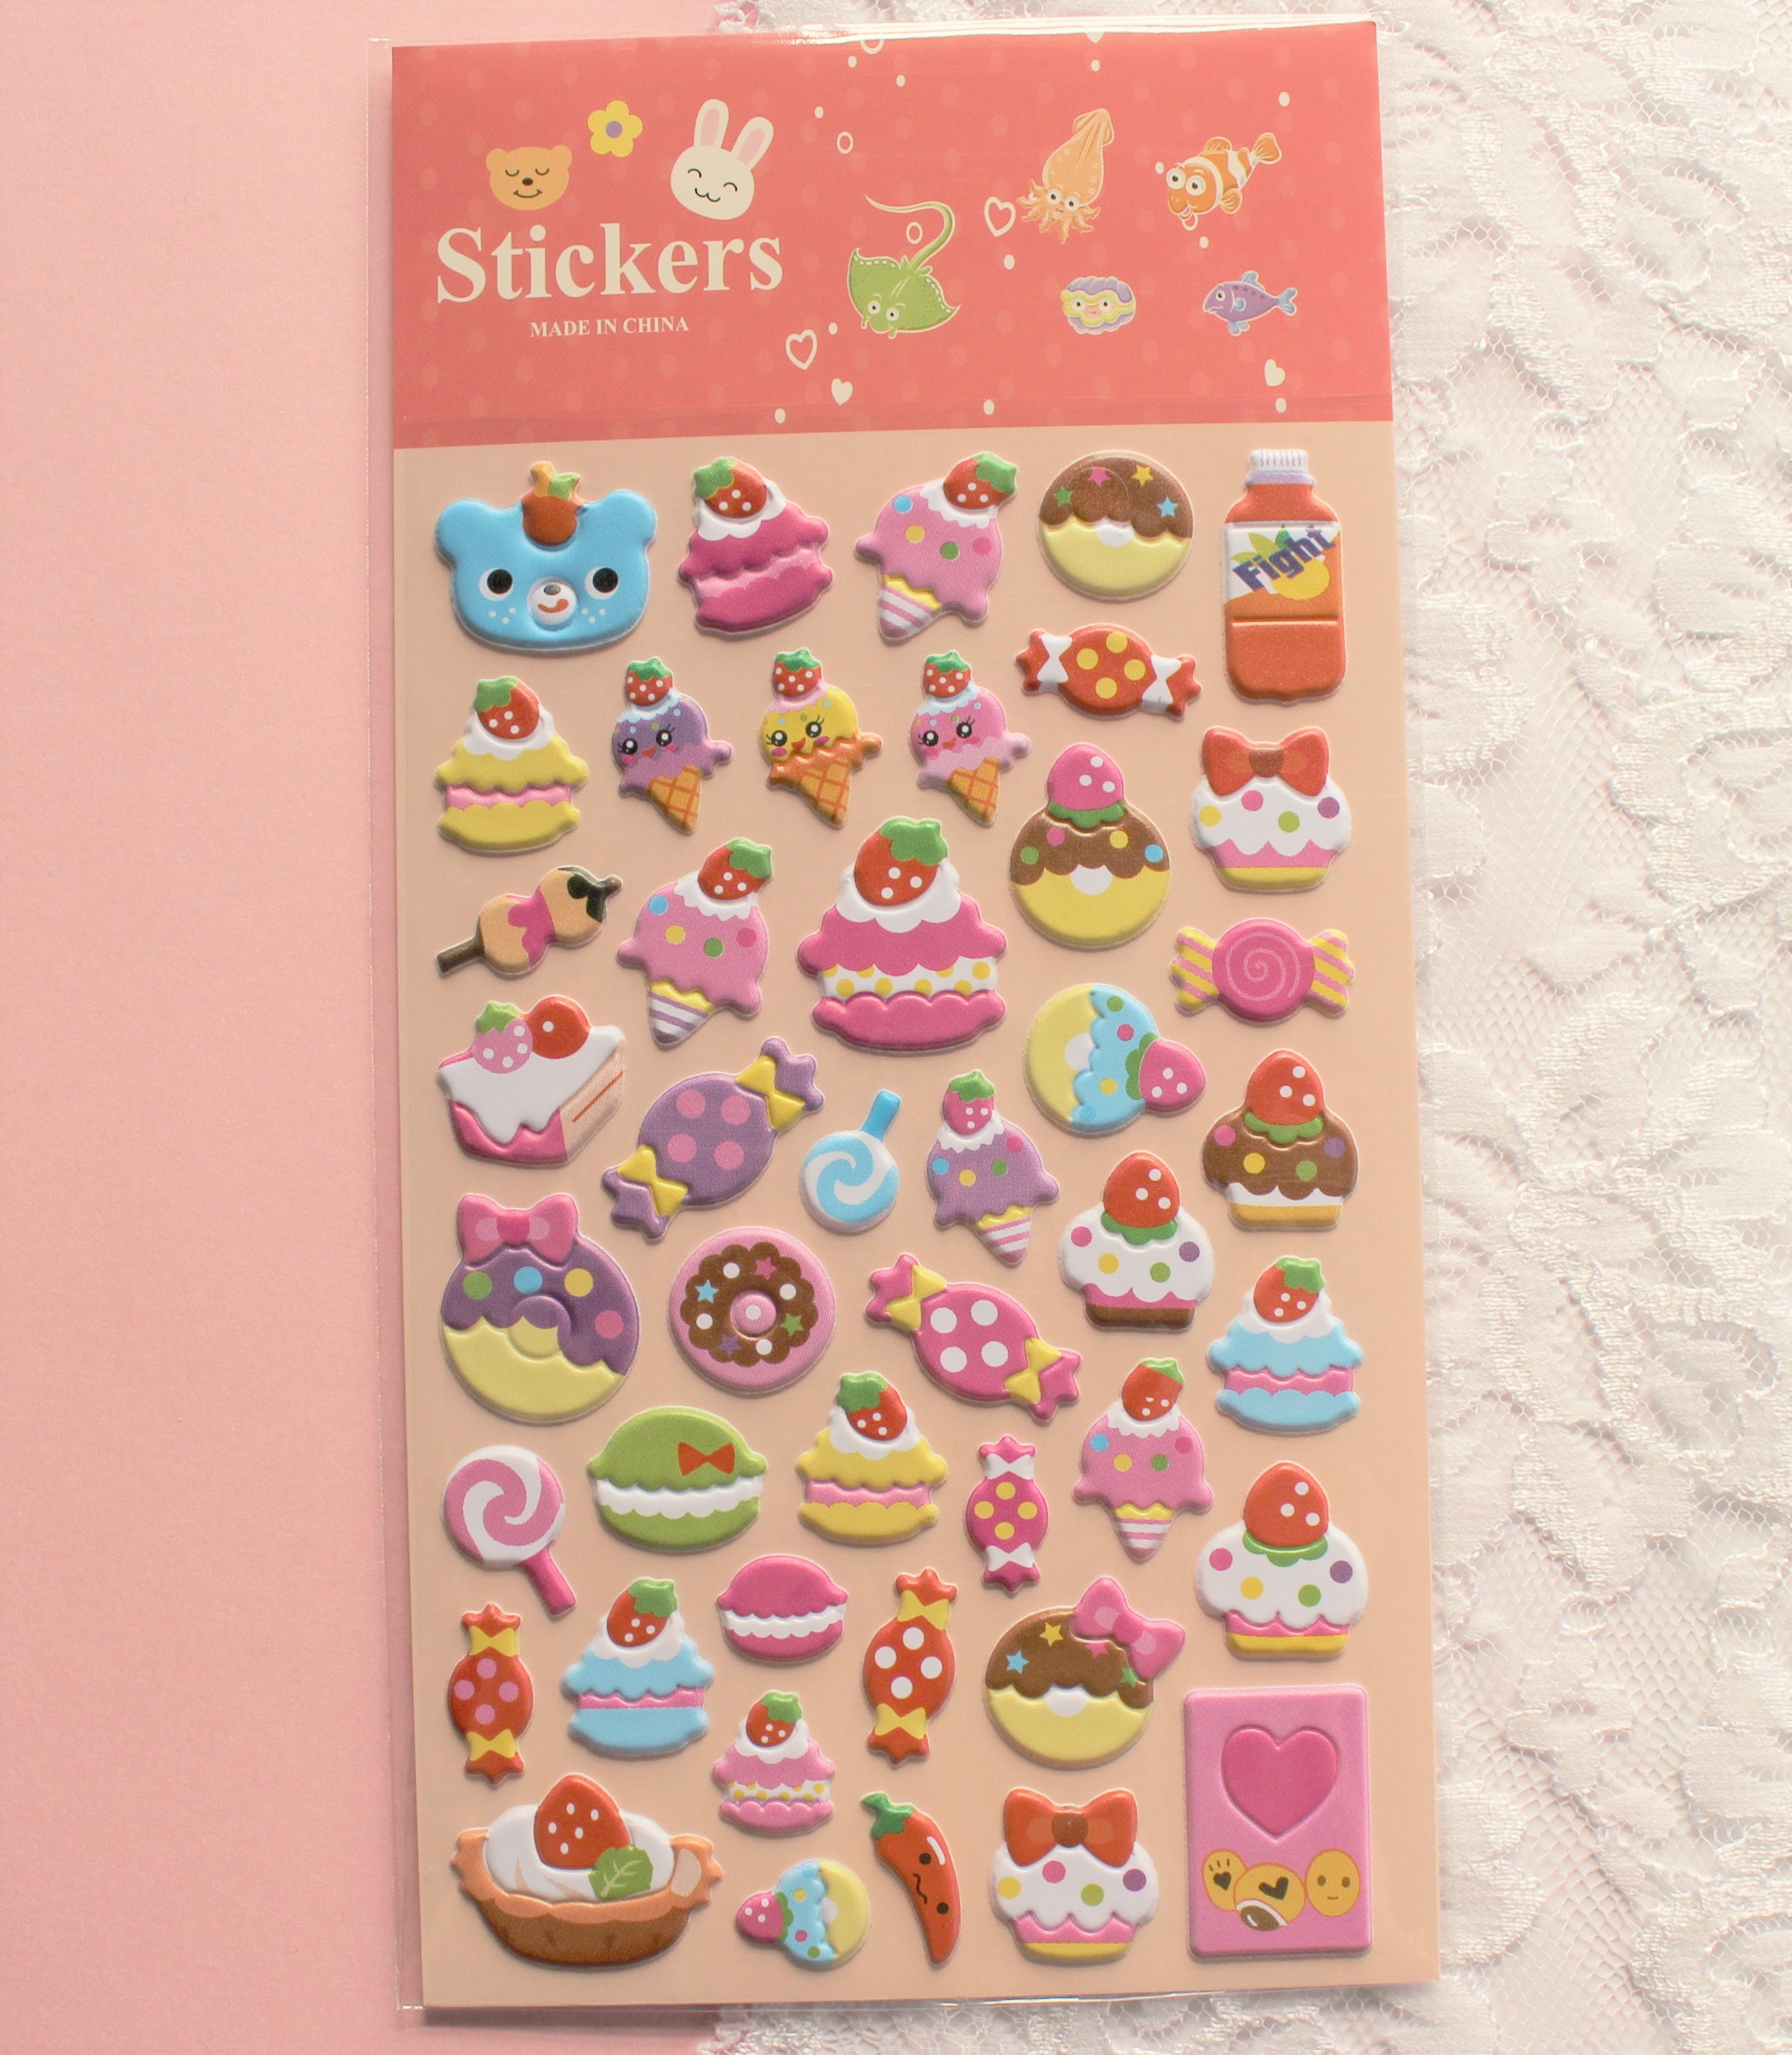 3D Puffy Food Stickers for Kids,Cute Food Stickers with Bread Pizza Sushi and Chocolate Stickers, Small Mini Food Theme Stickers for Scrapbooking